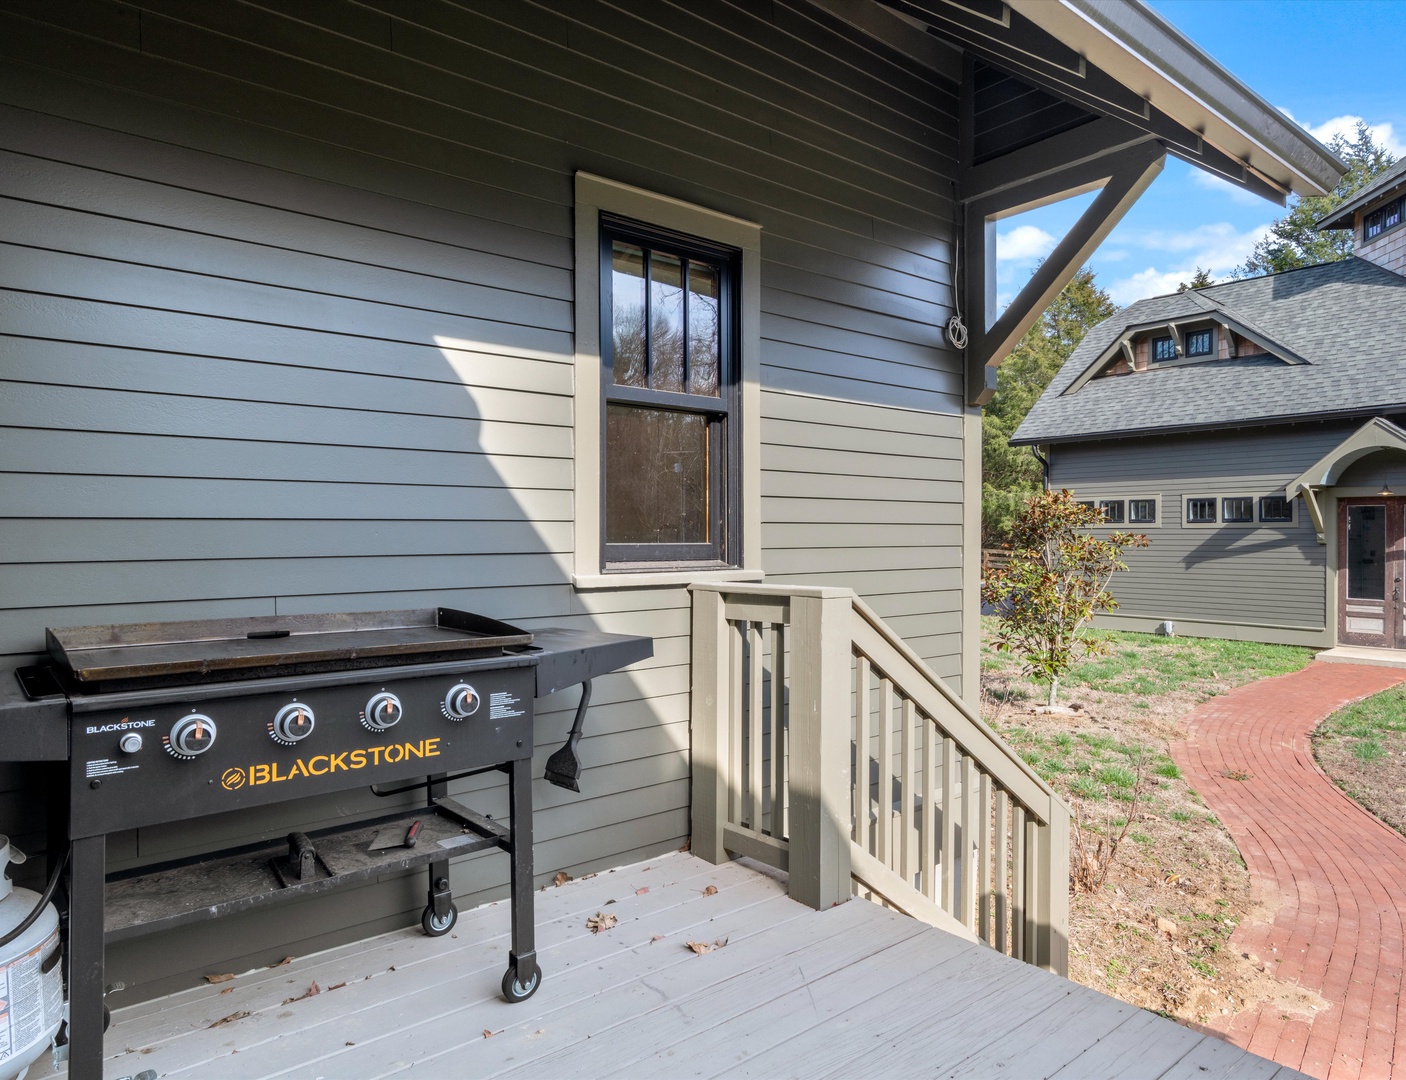 Secondary porch with Grill